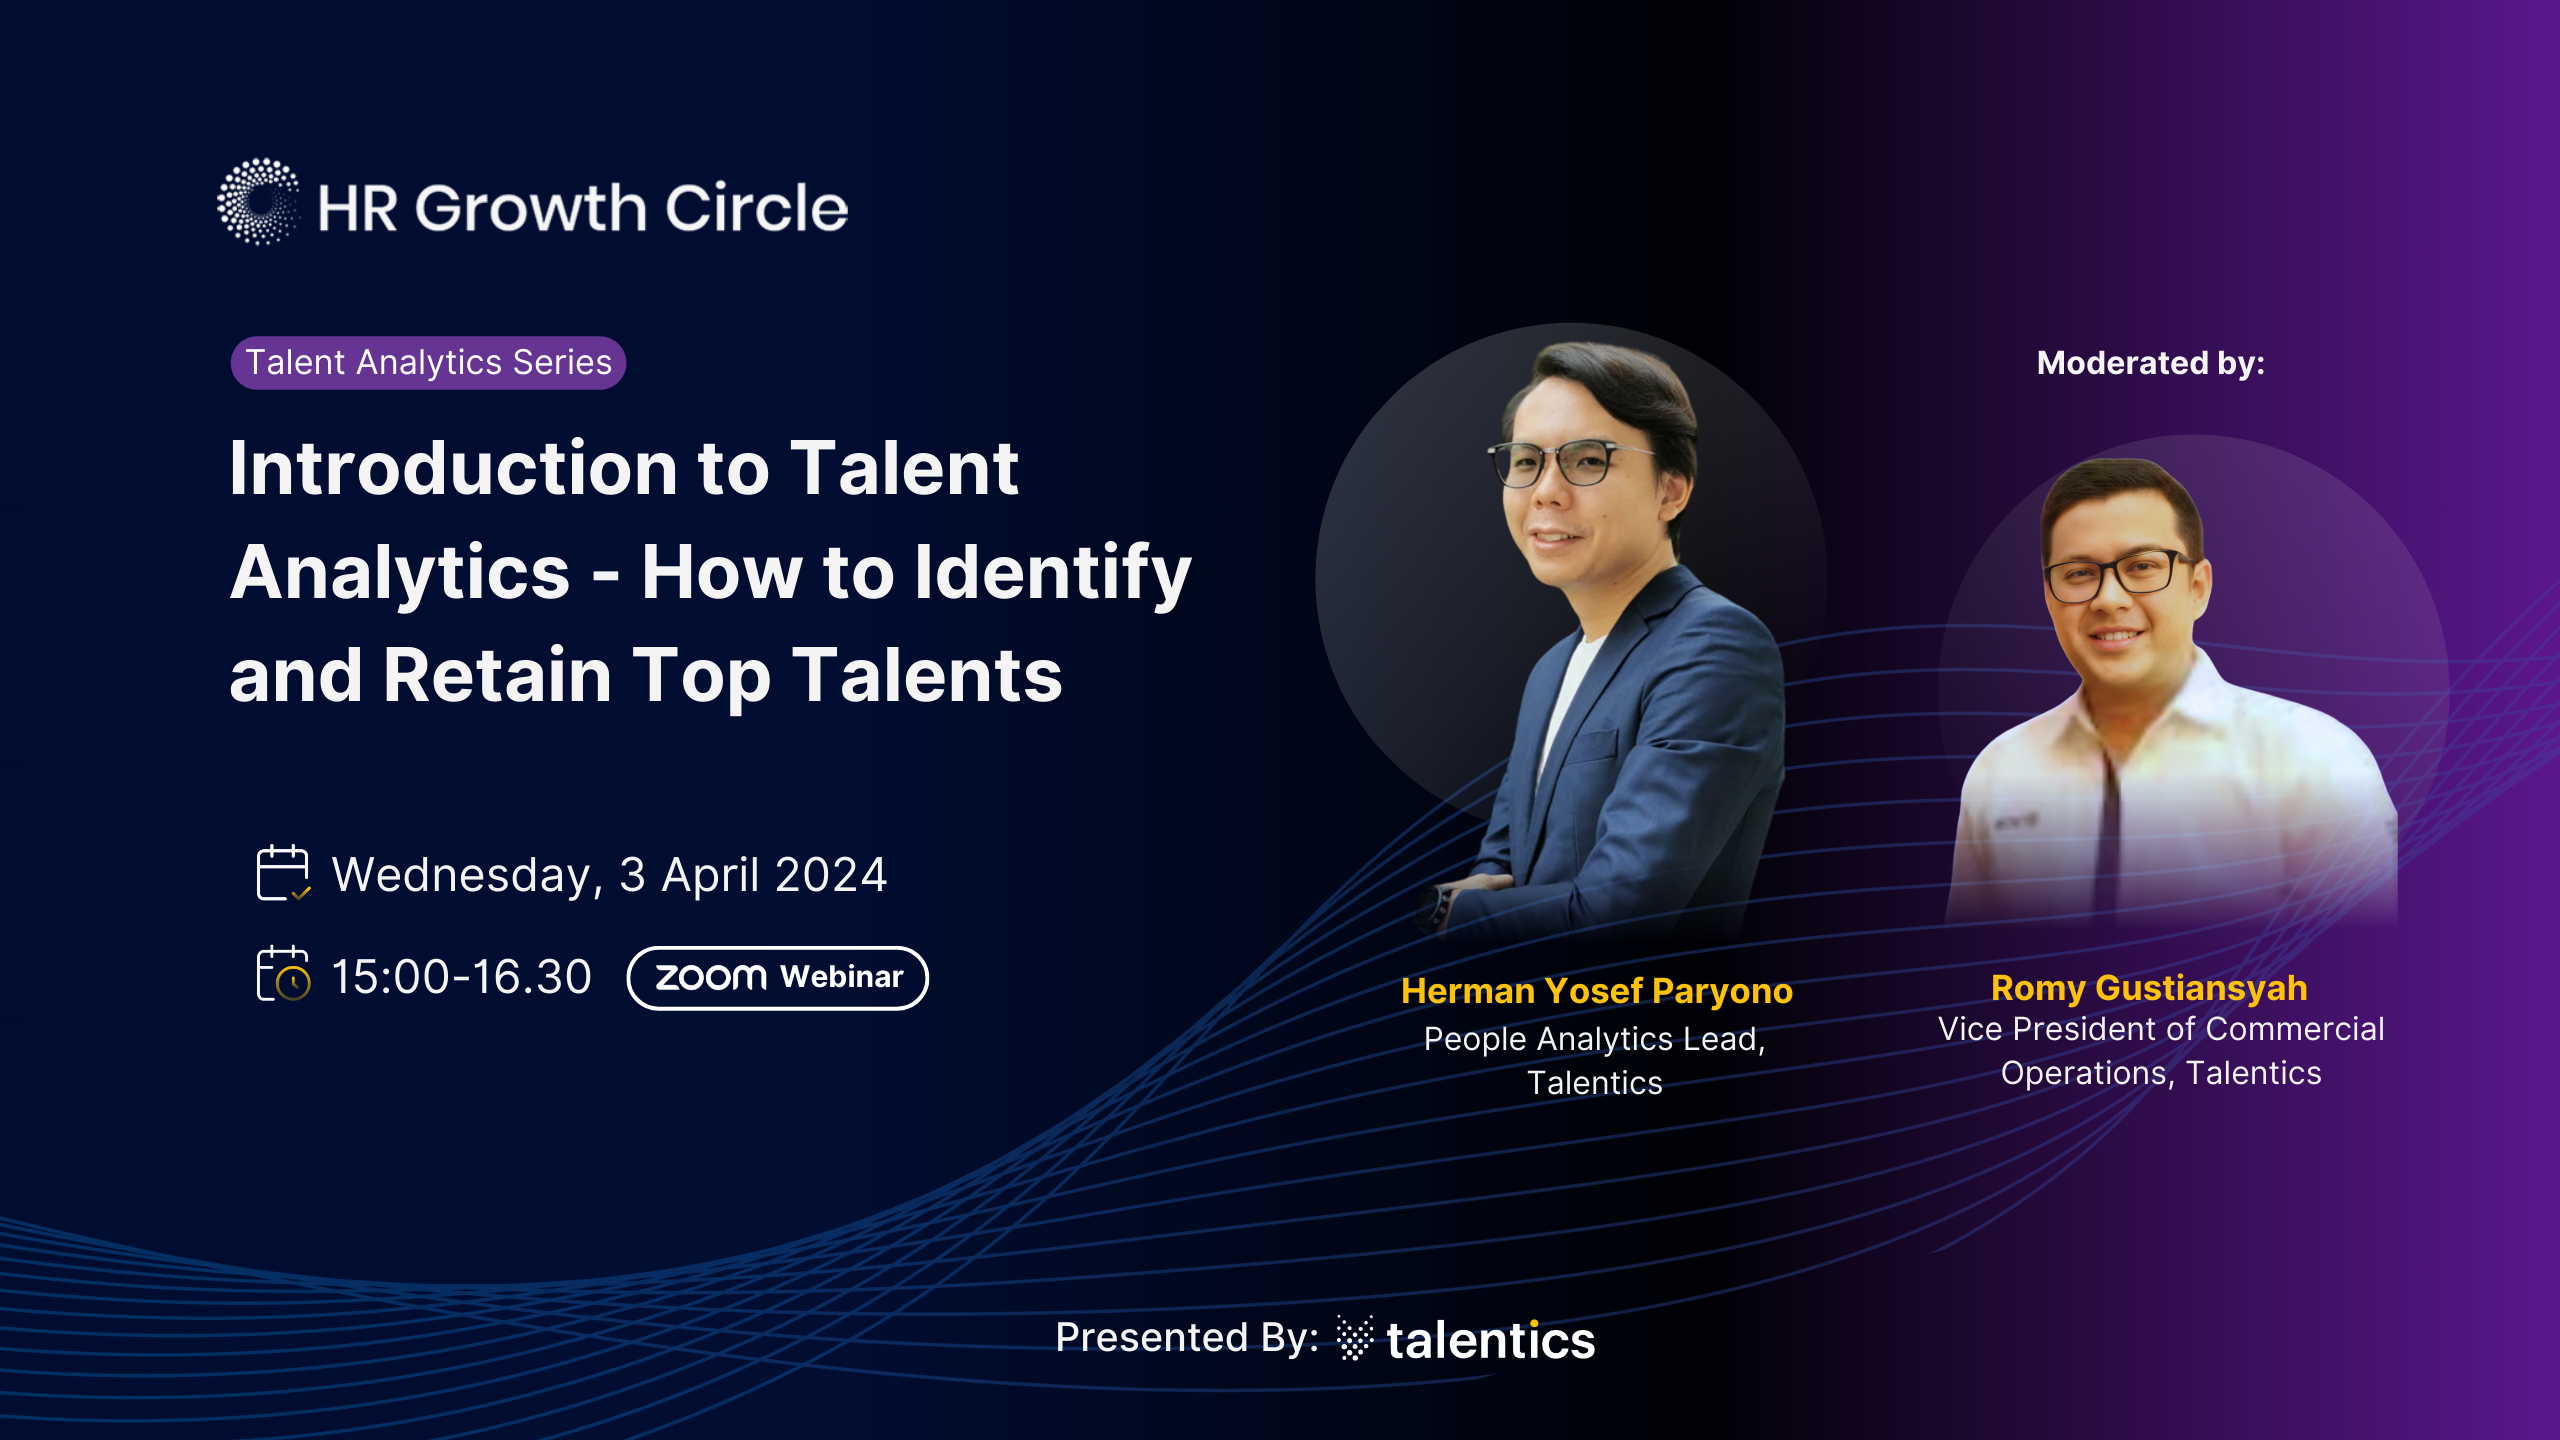 Introduction to Talent Analytics - How to Identify and Retain Top Talents